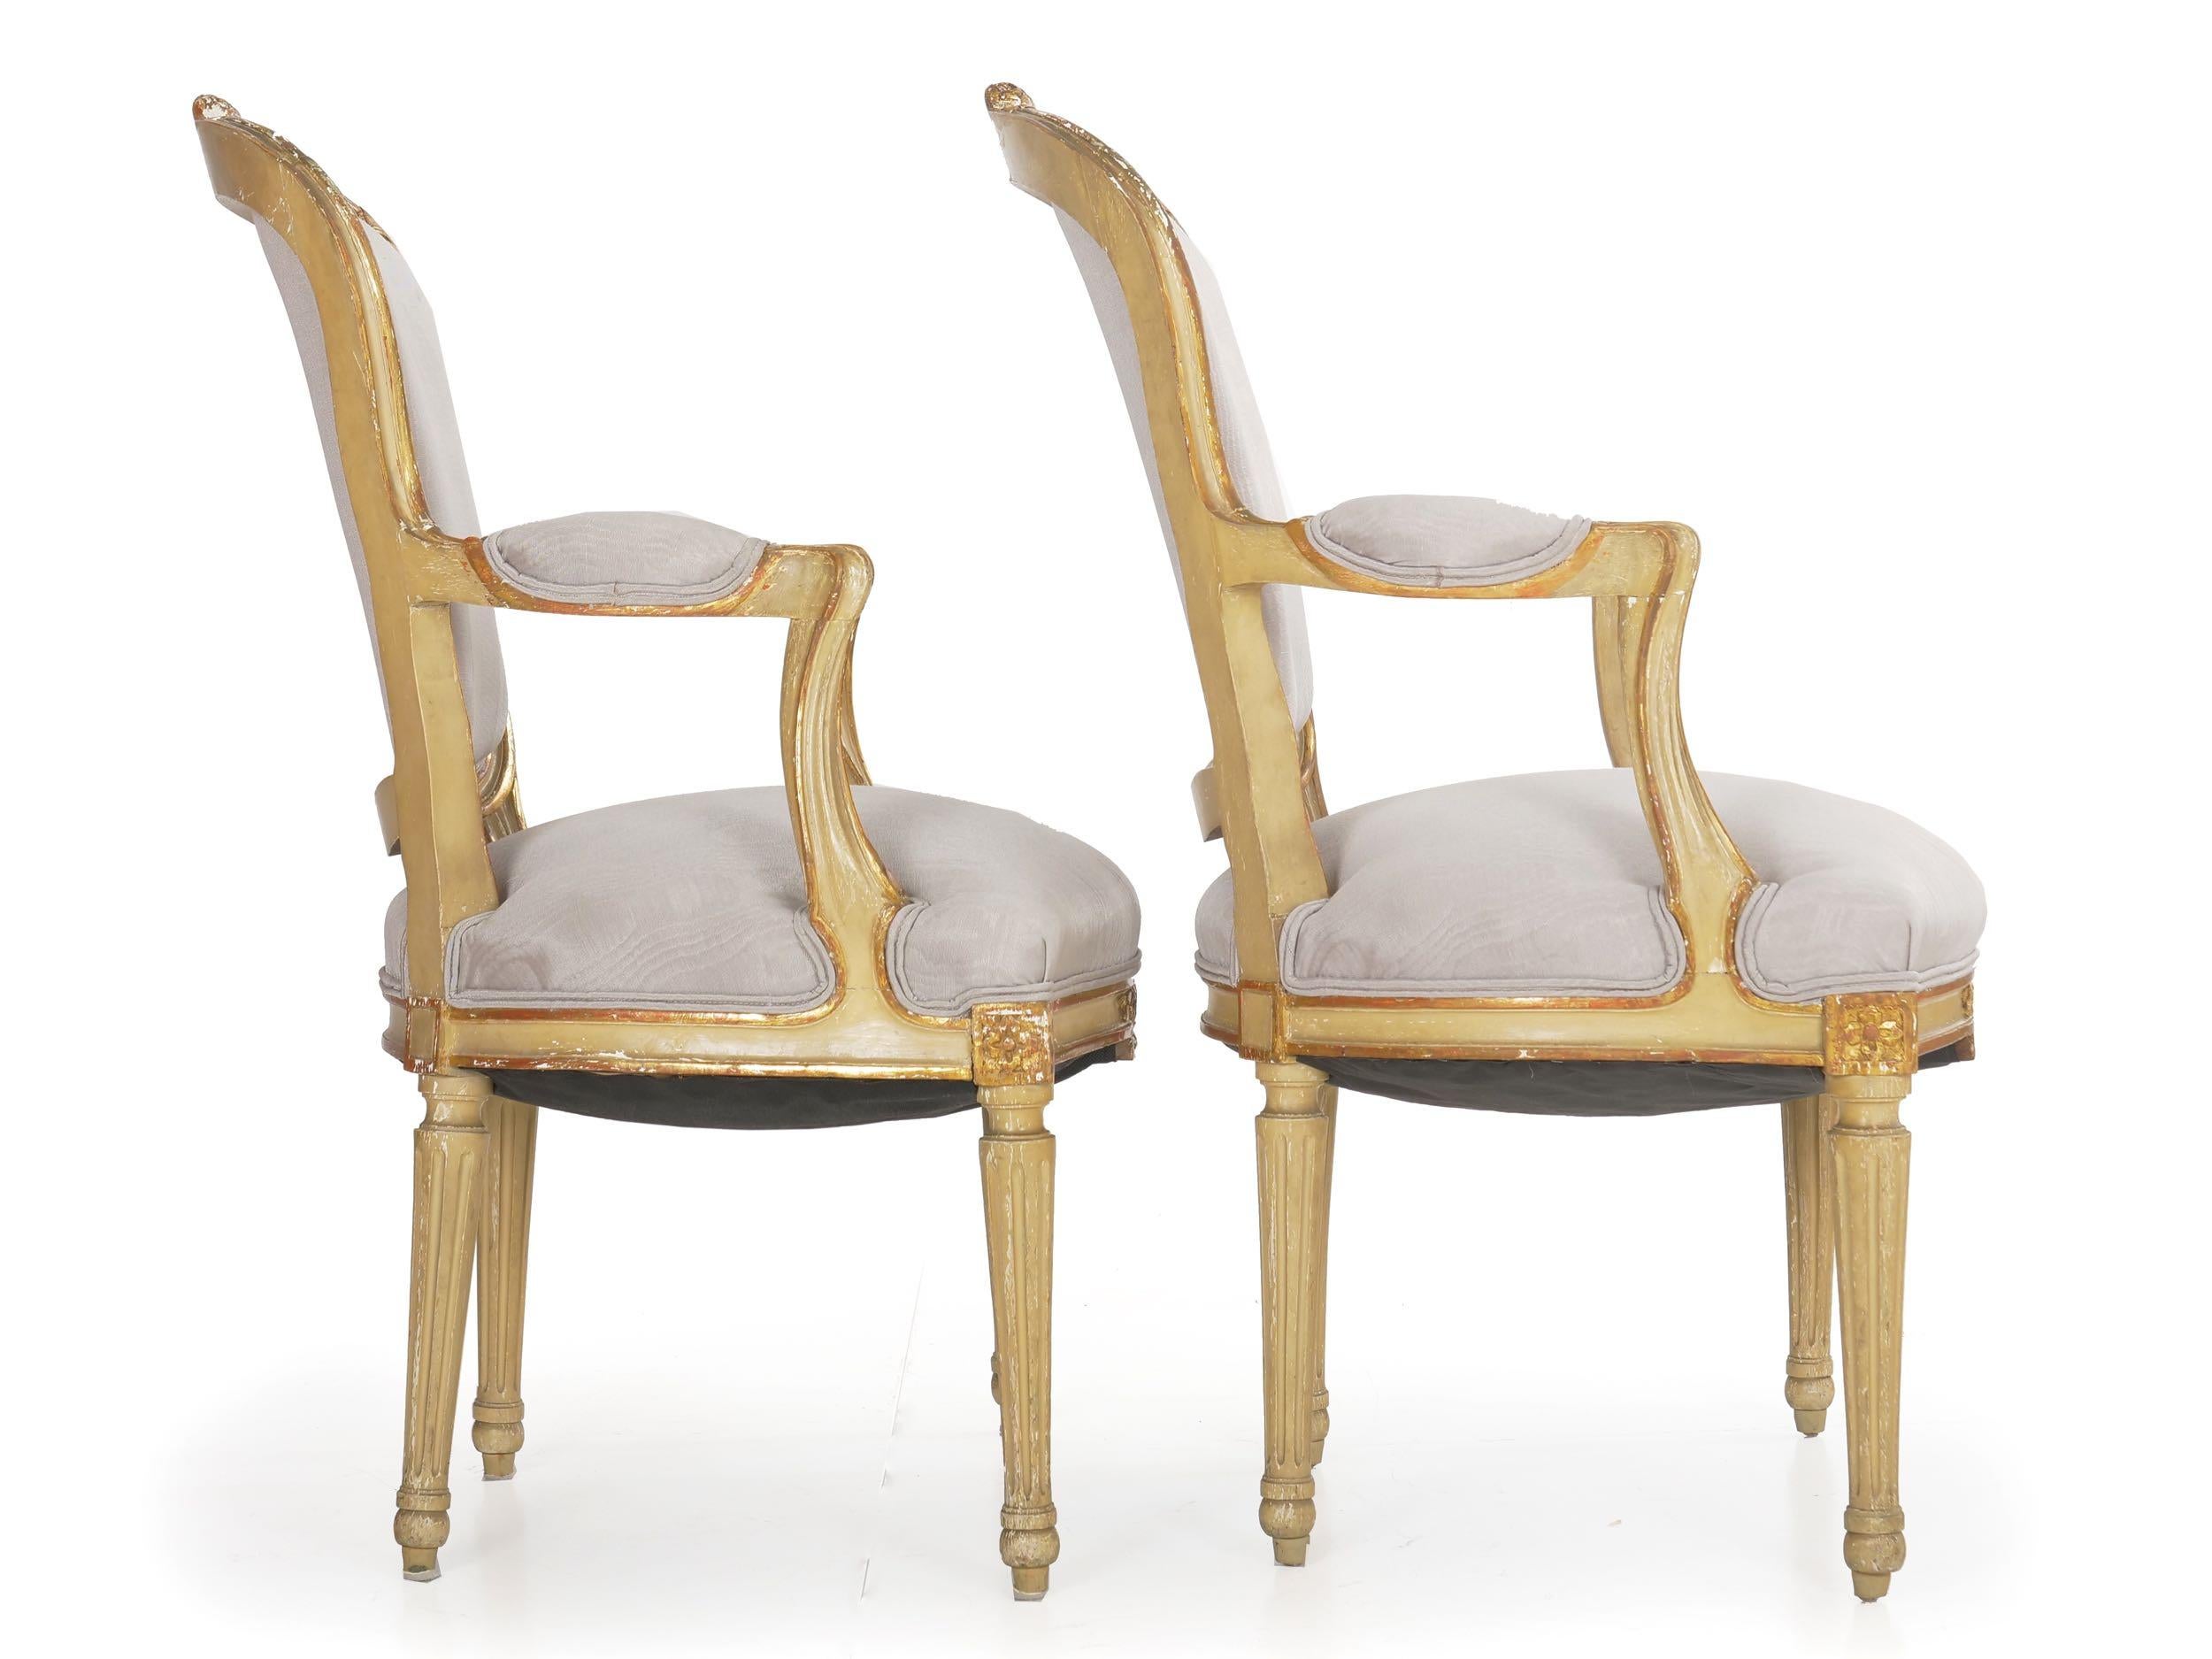 Pair of French Antique Painted Louis XVI Style Armchairs Fauteuils, 19th Century 1